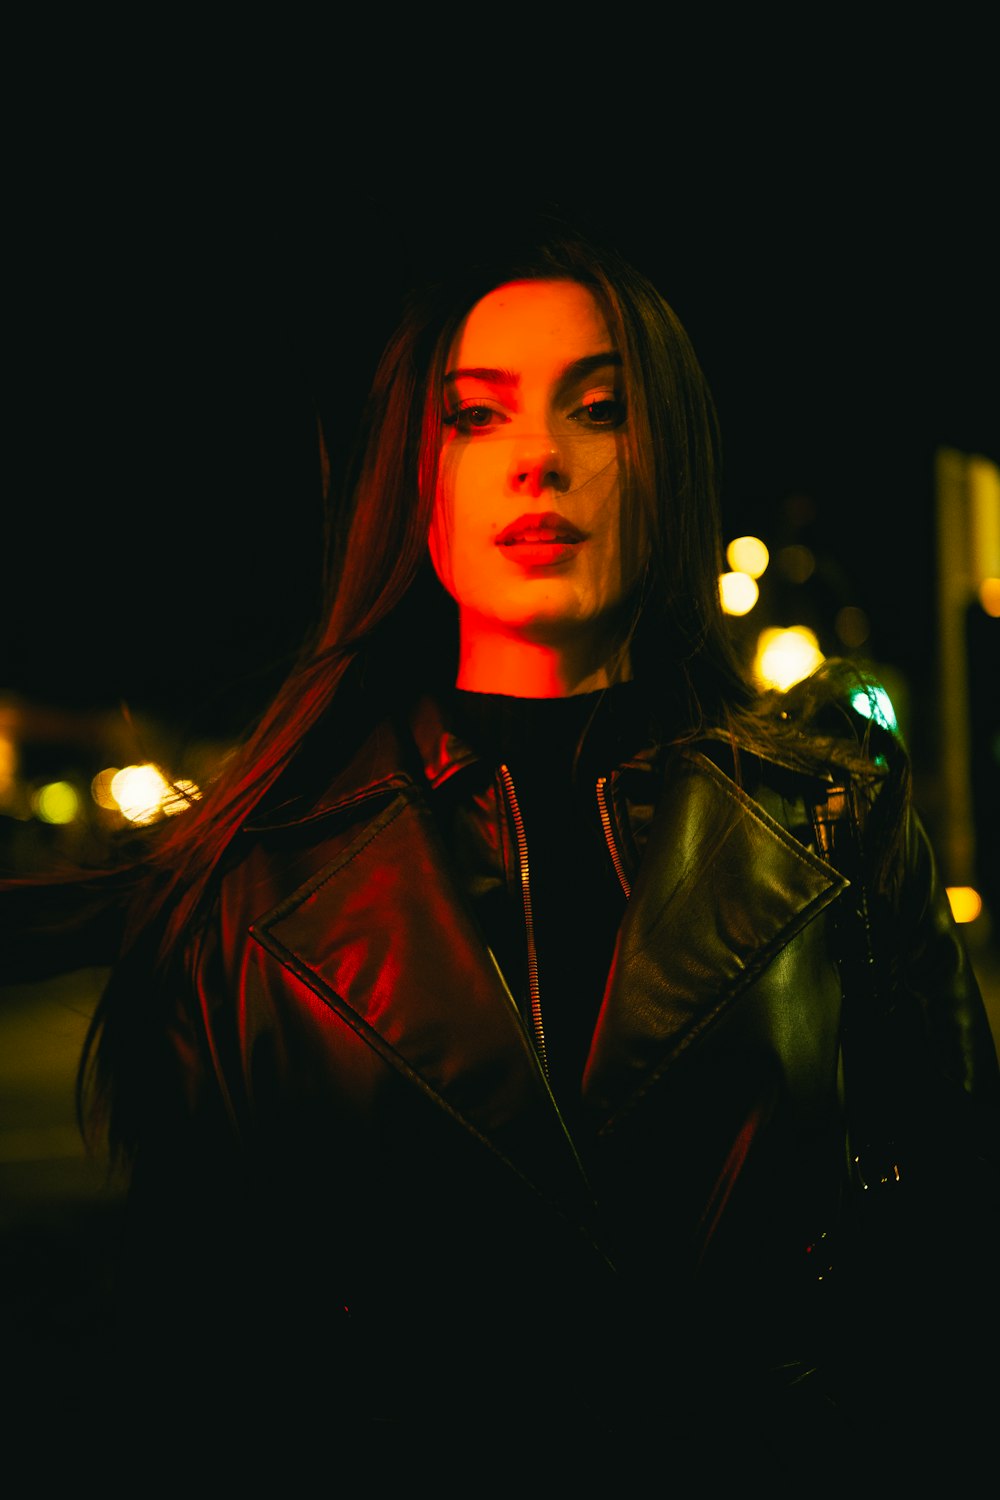 a woman in a leather jacket standing on a street at night